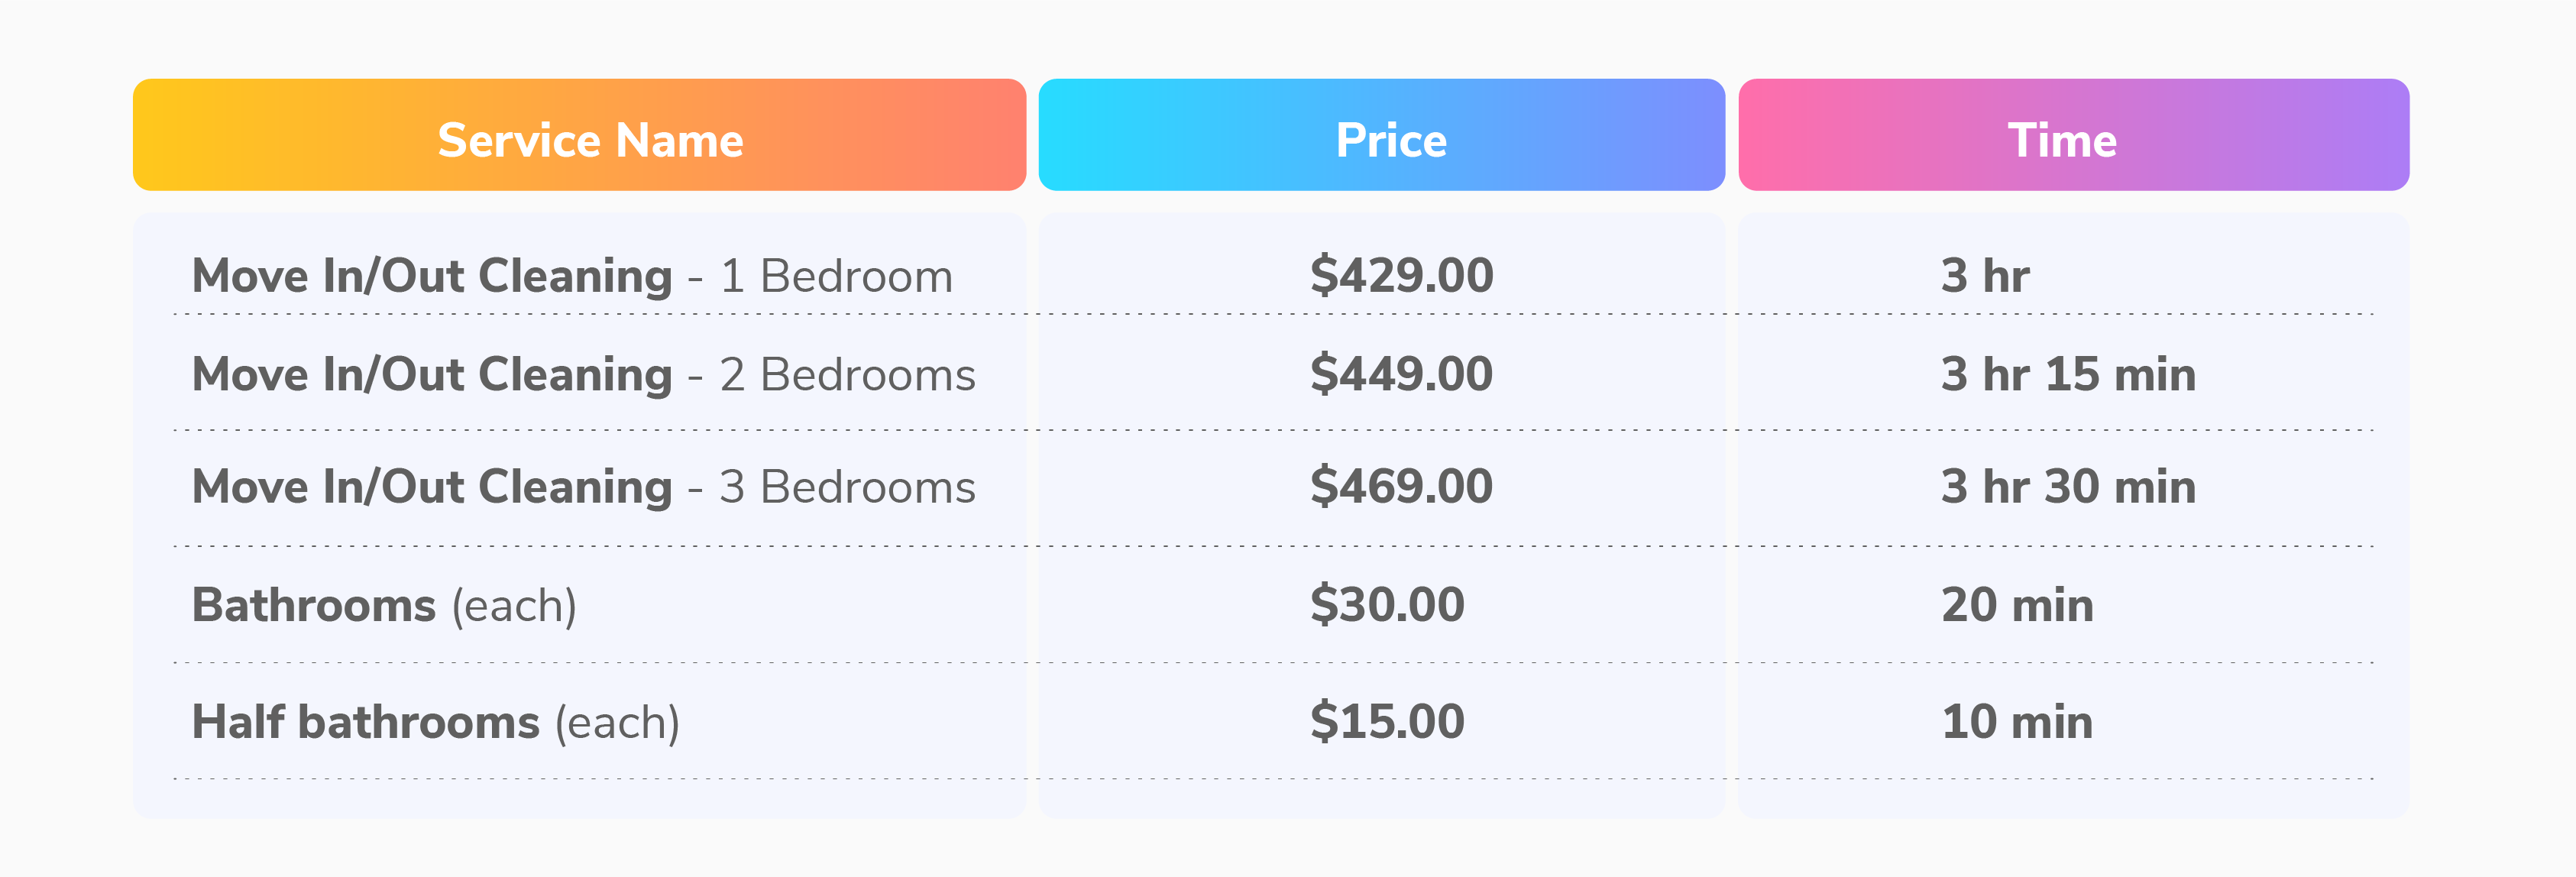 Pricing sheet for cleaning service